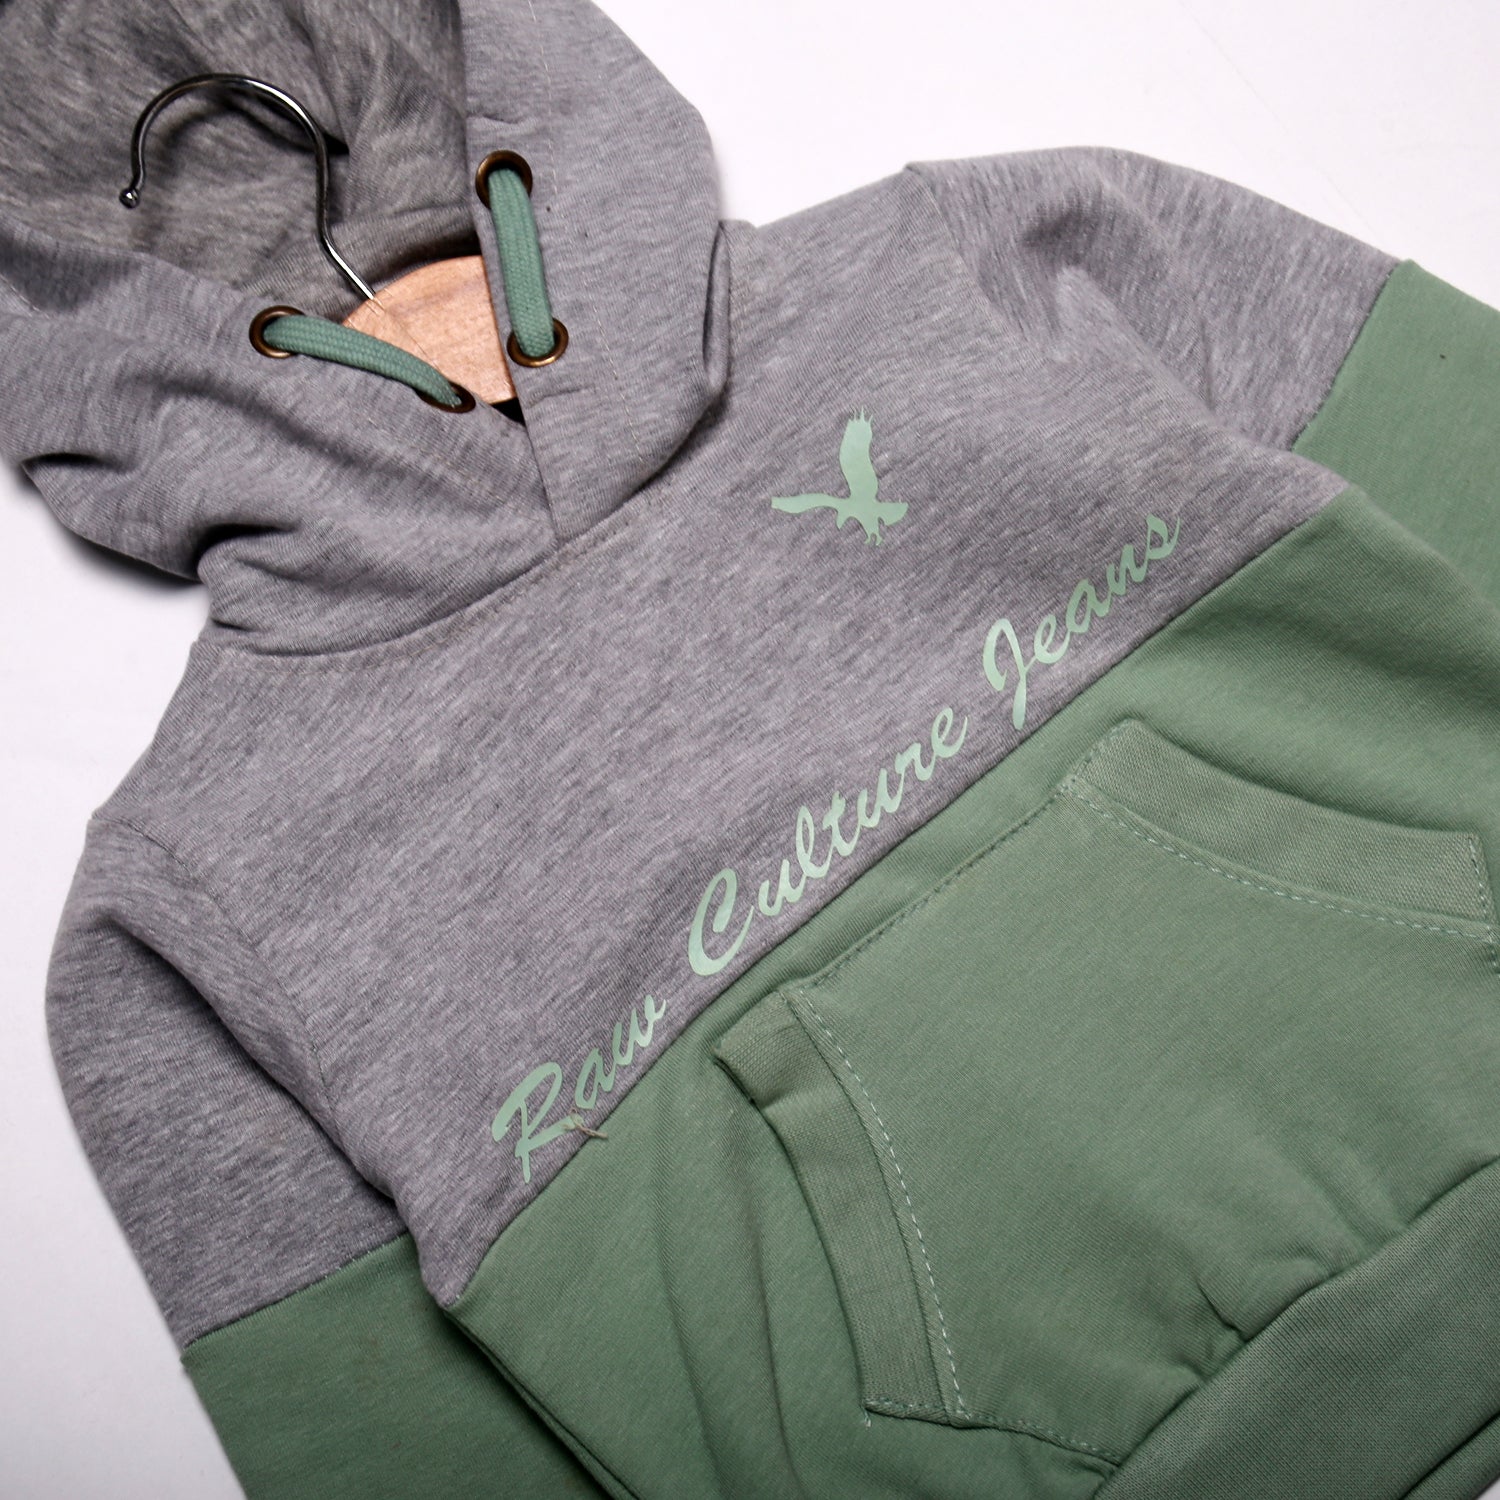 NEW LIGHT GREEN & GREY HOODIE WITH GREY TROUSER BABA SUIT